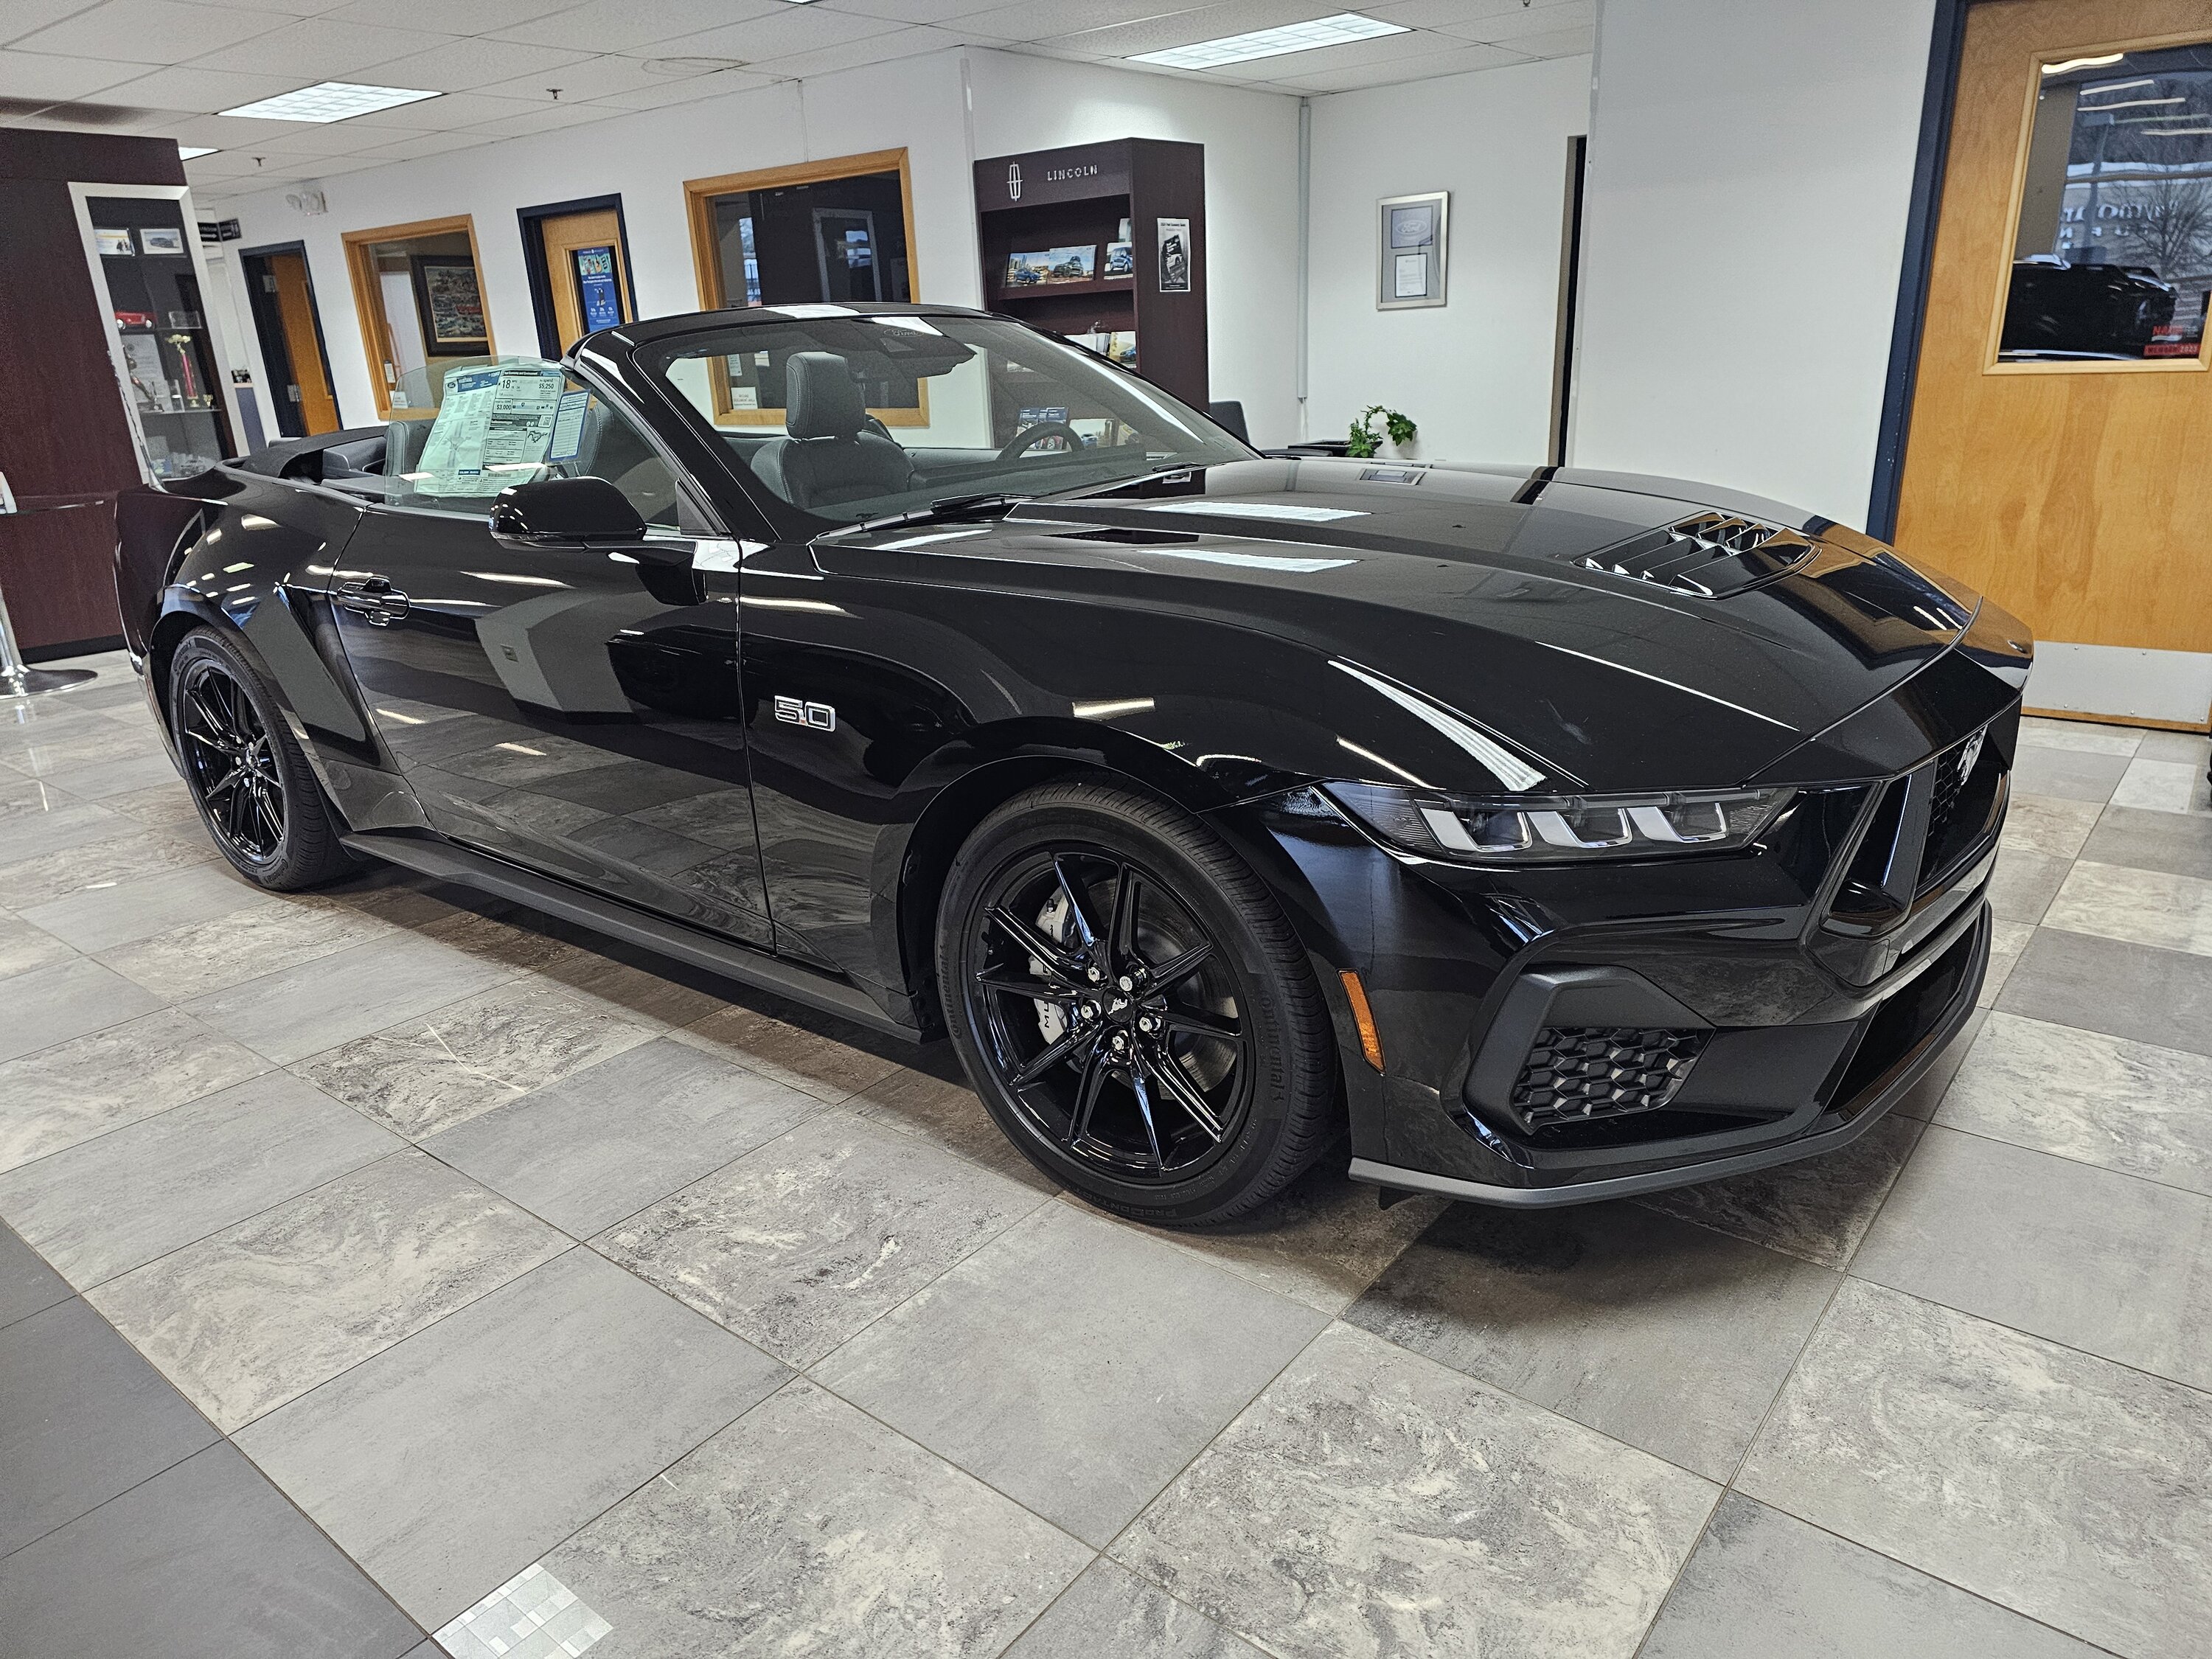 S650 Mustang Check out this covertible's wheels 1000010972